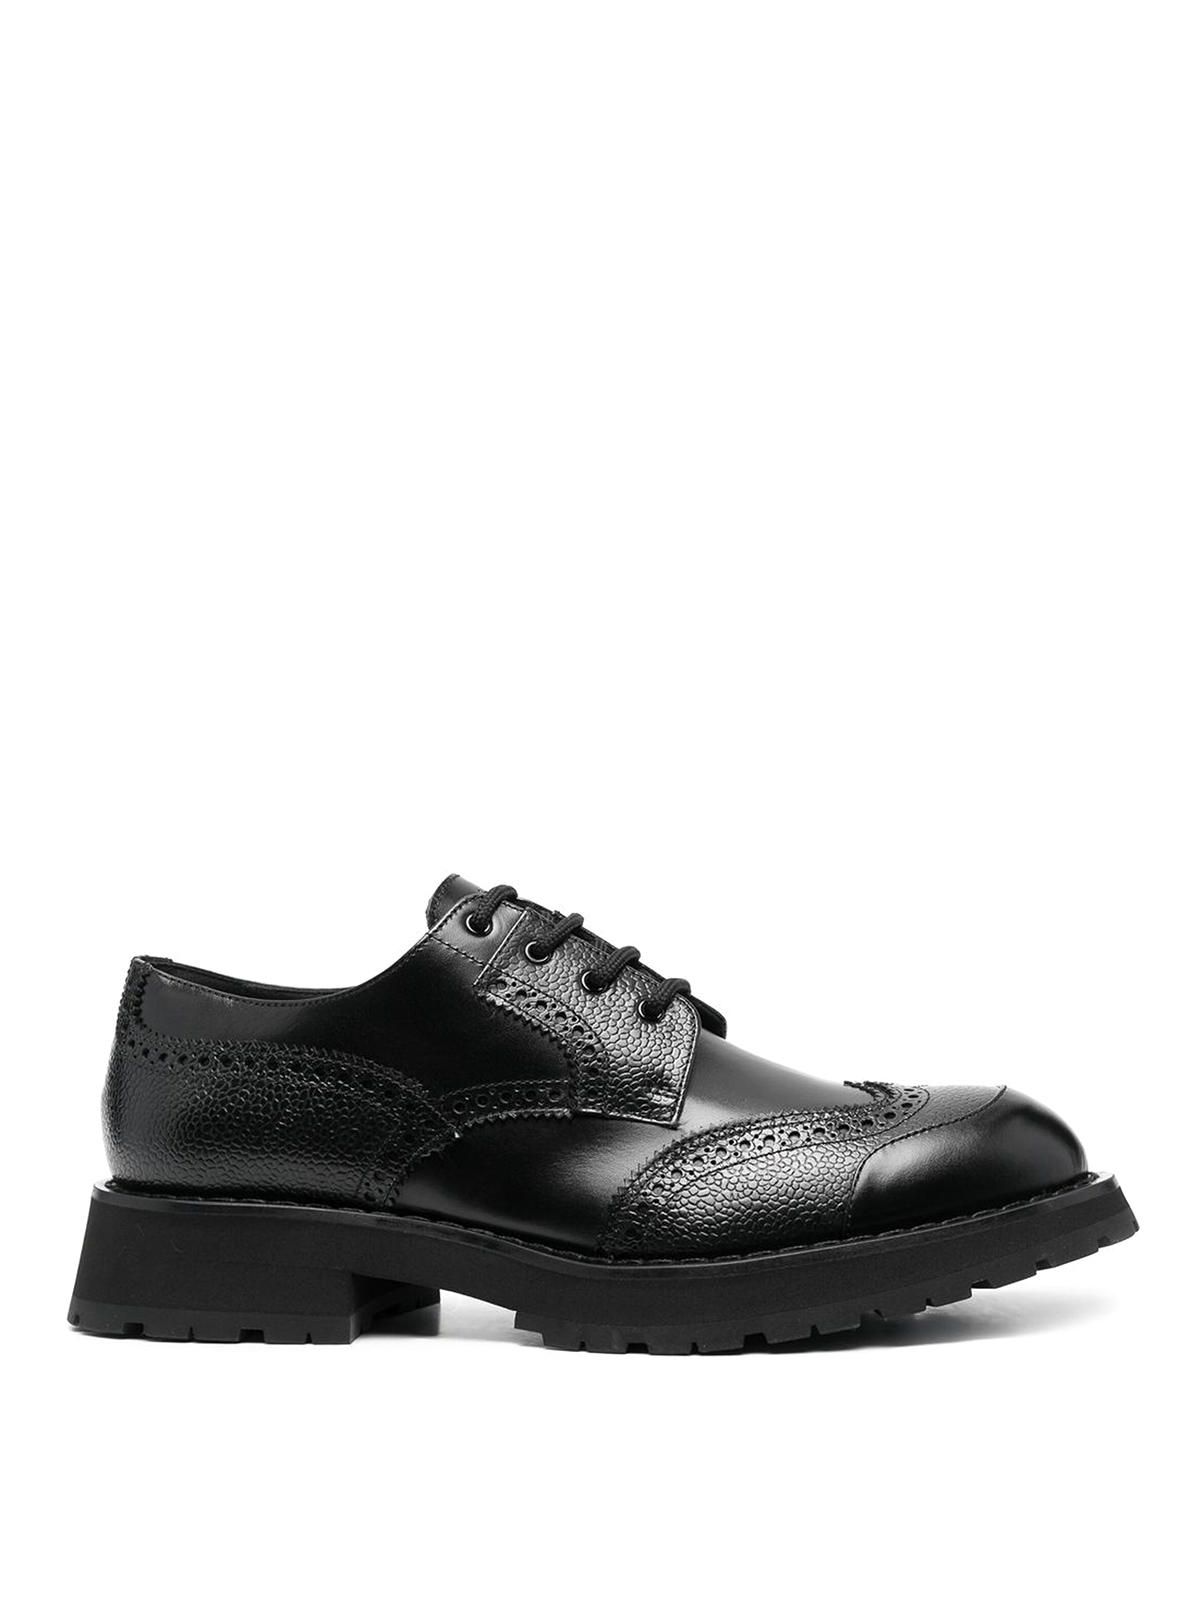 ALEXANDER MCQUEEN POLISHED LEATHER LACE-UP FASTENING BROGUES